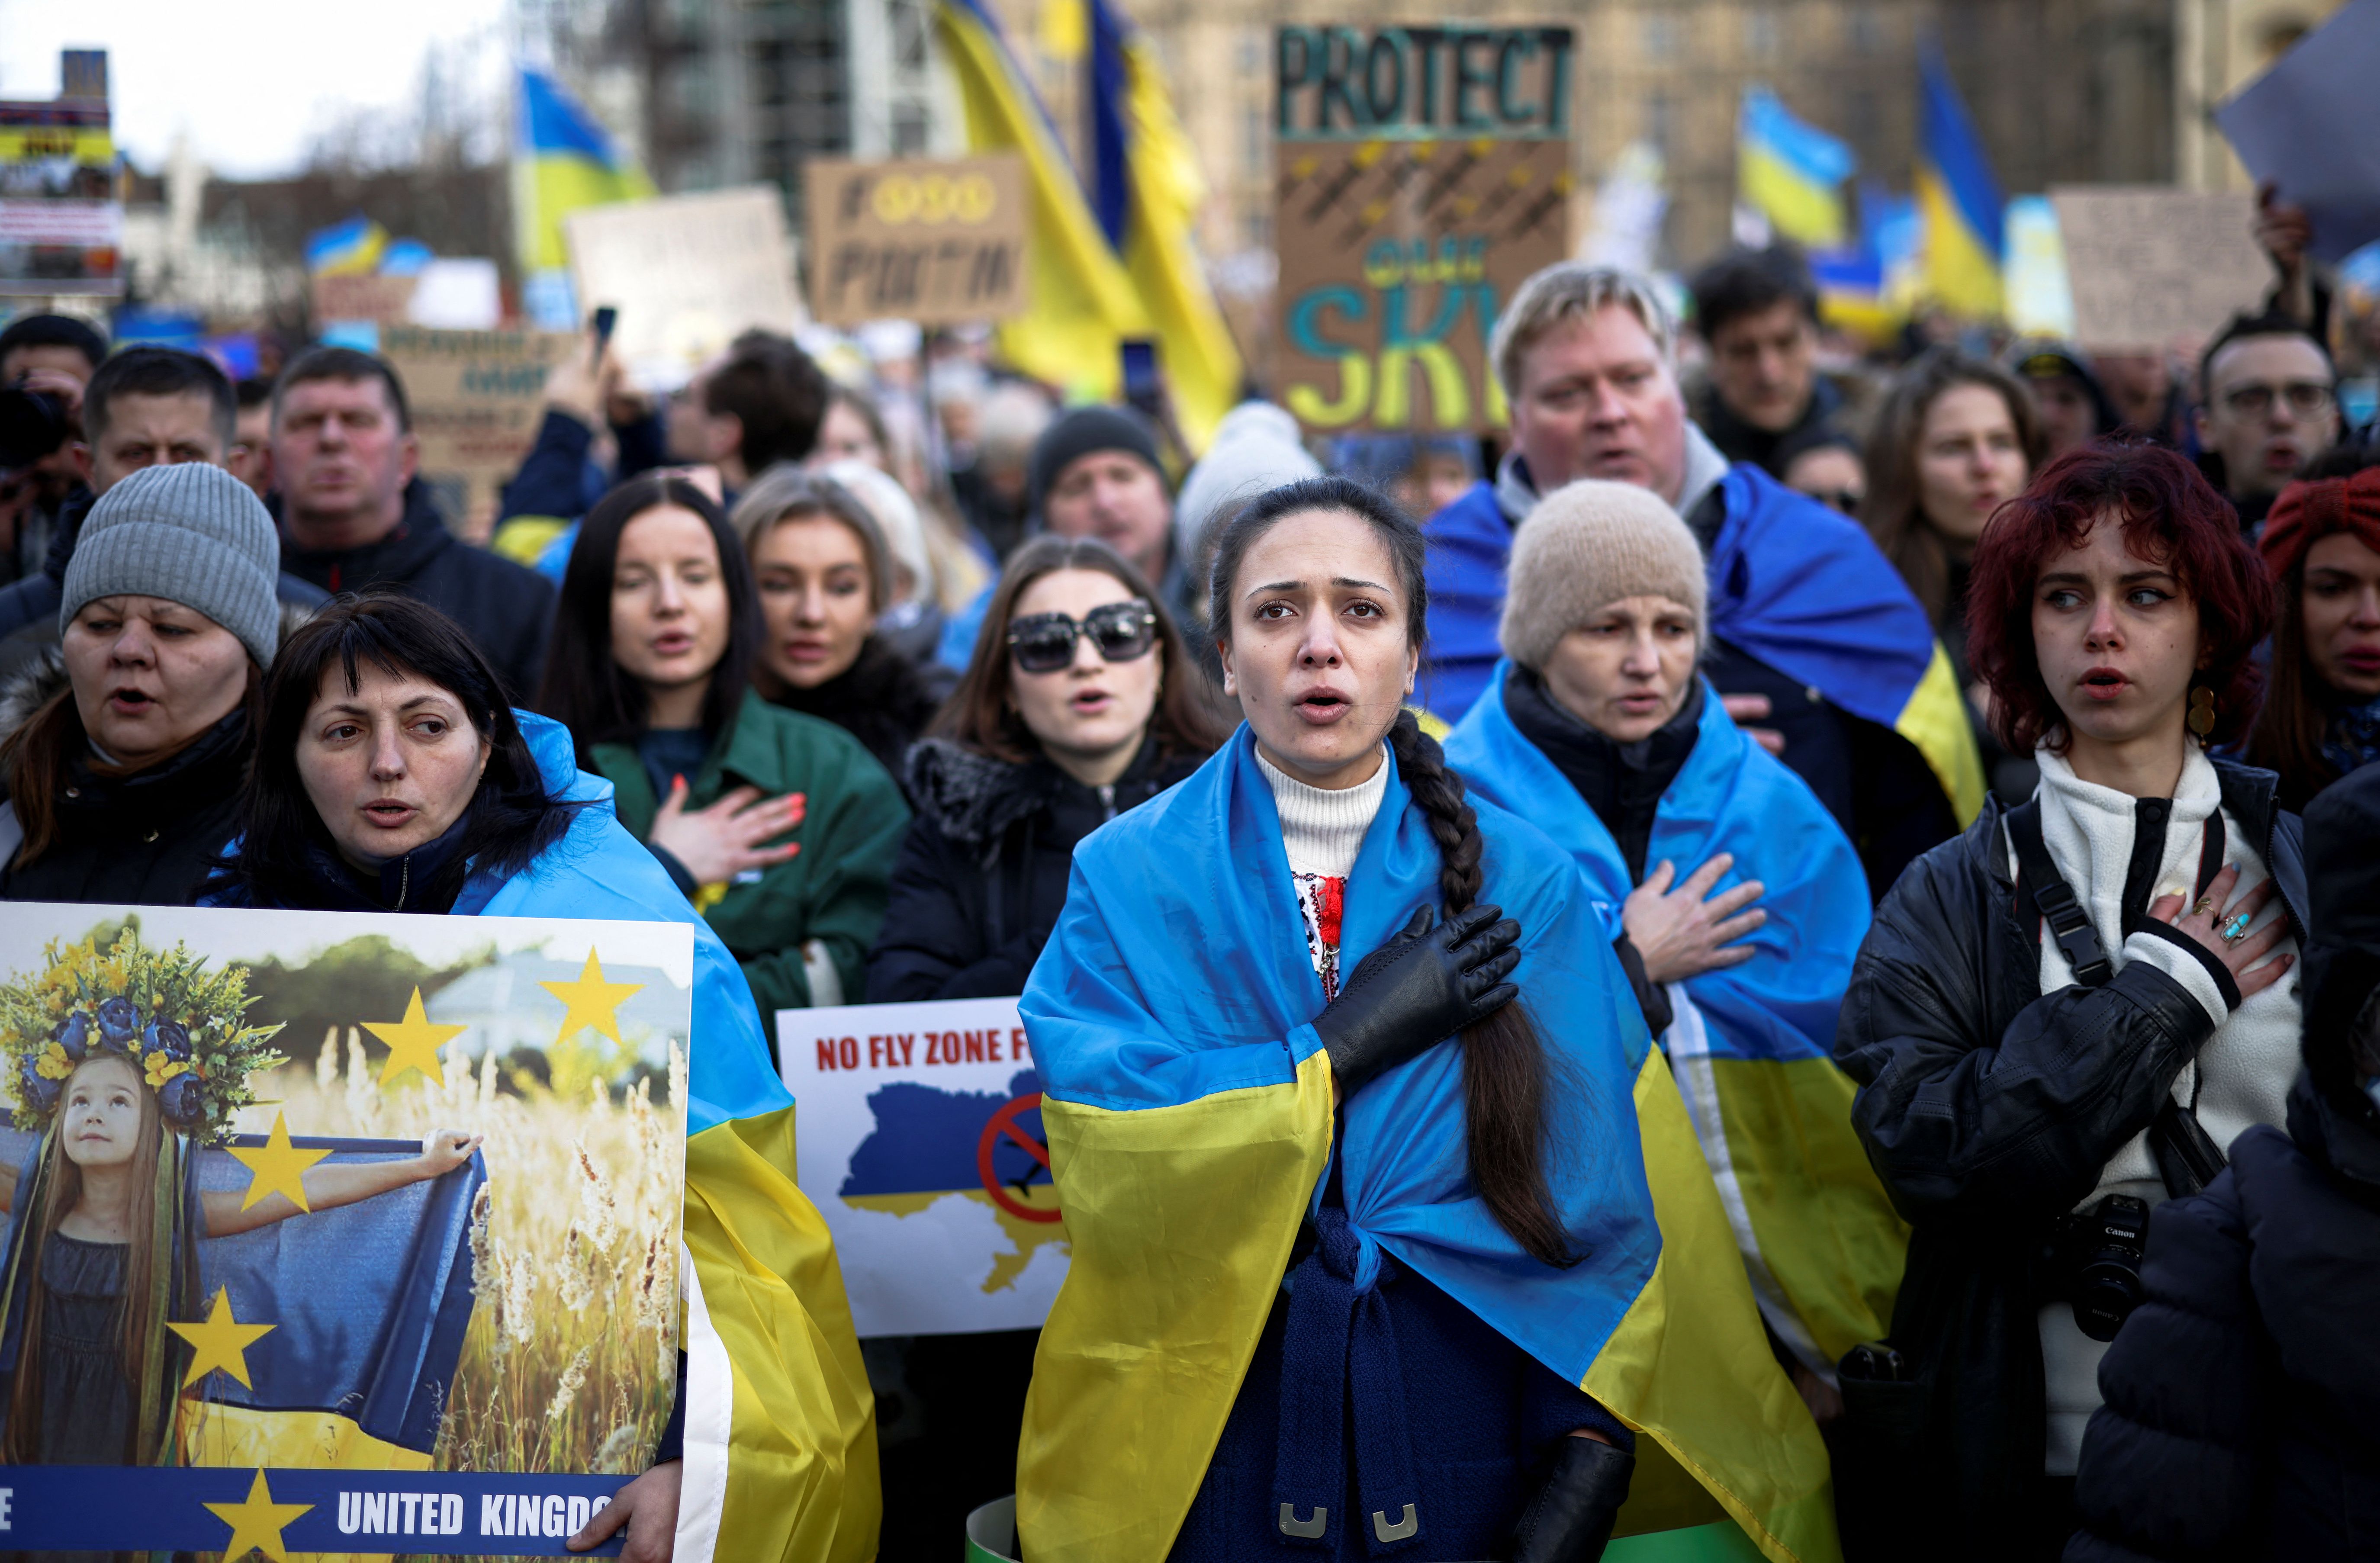 Demonstrators sing the Ukrainian national anthem during a protest against the Russian invasion of Ukraine, in Parliament Square in London, Britain.  (REUTERS/Henry Nicholls).